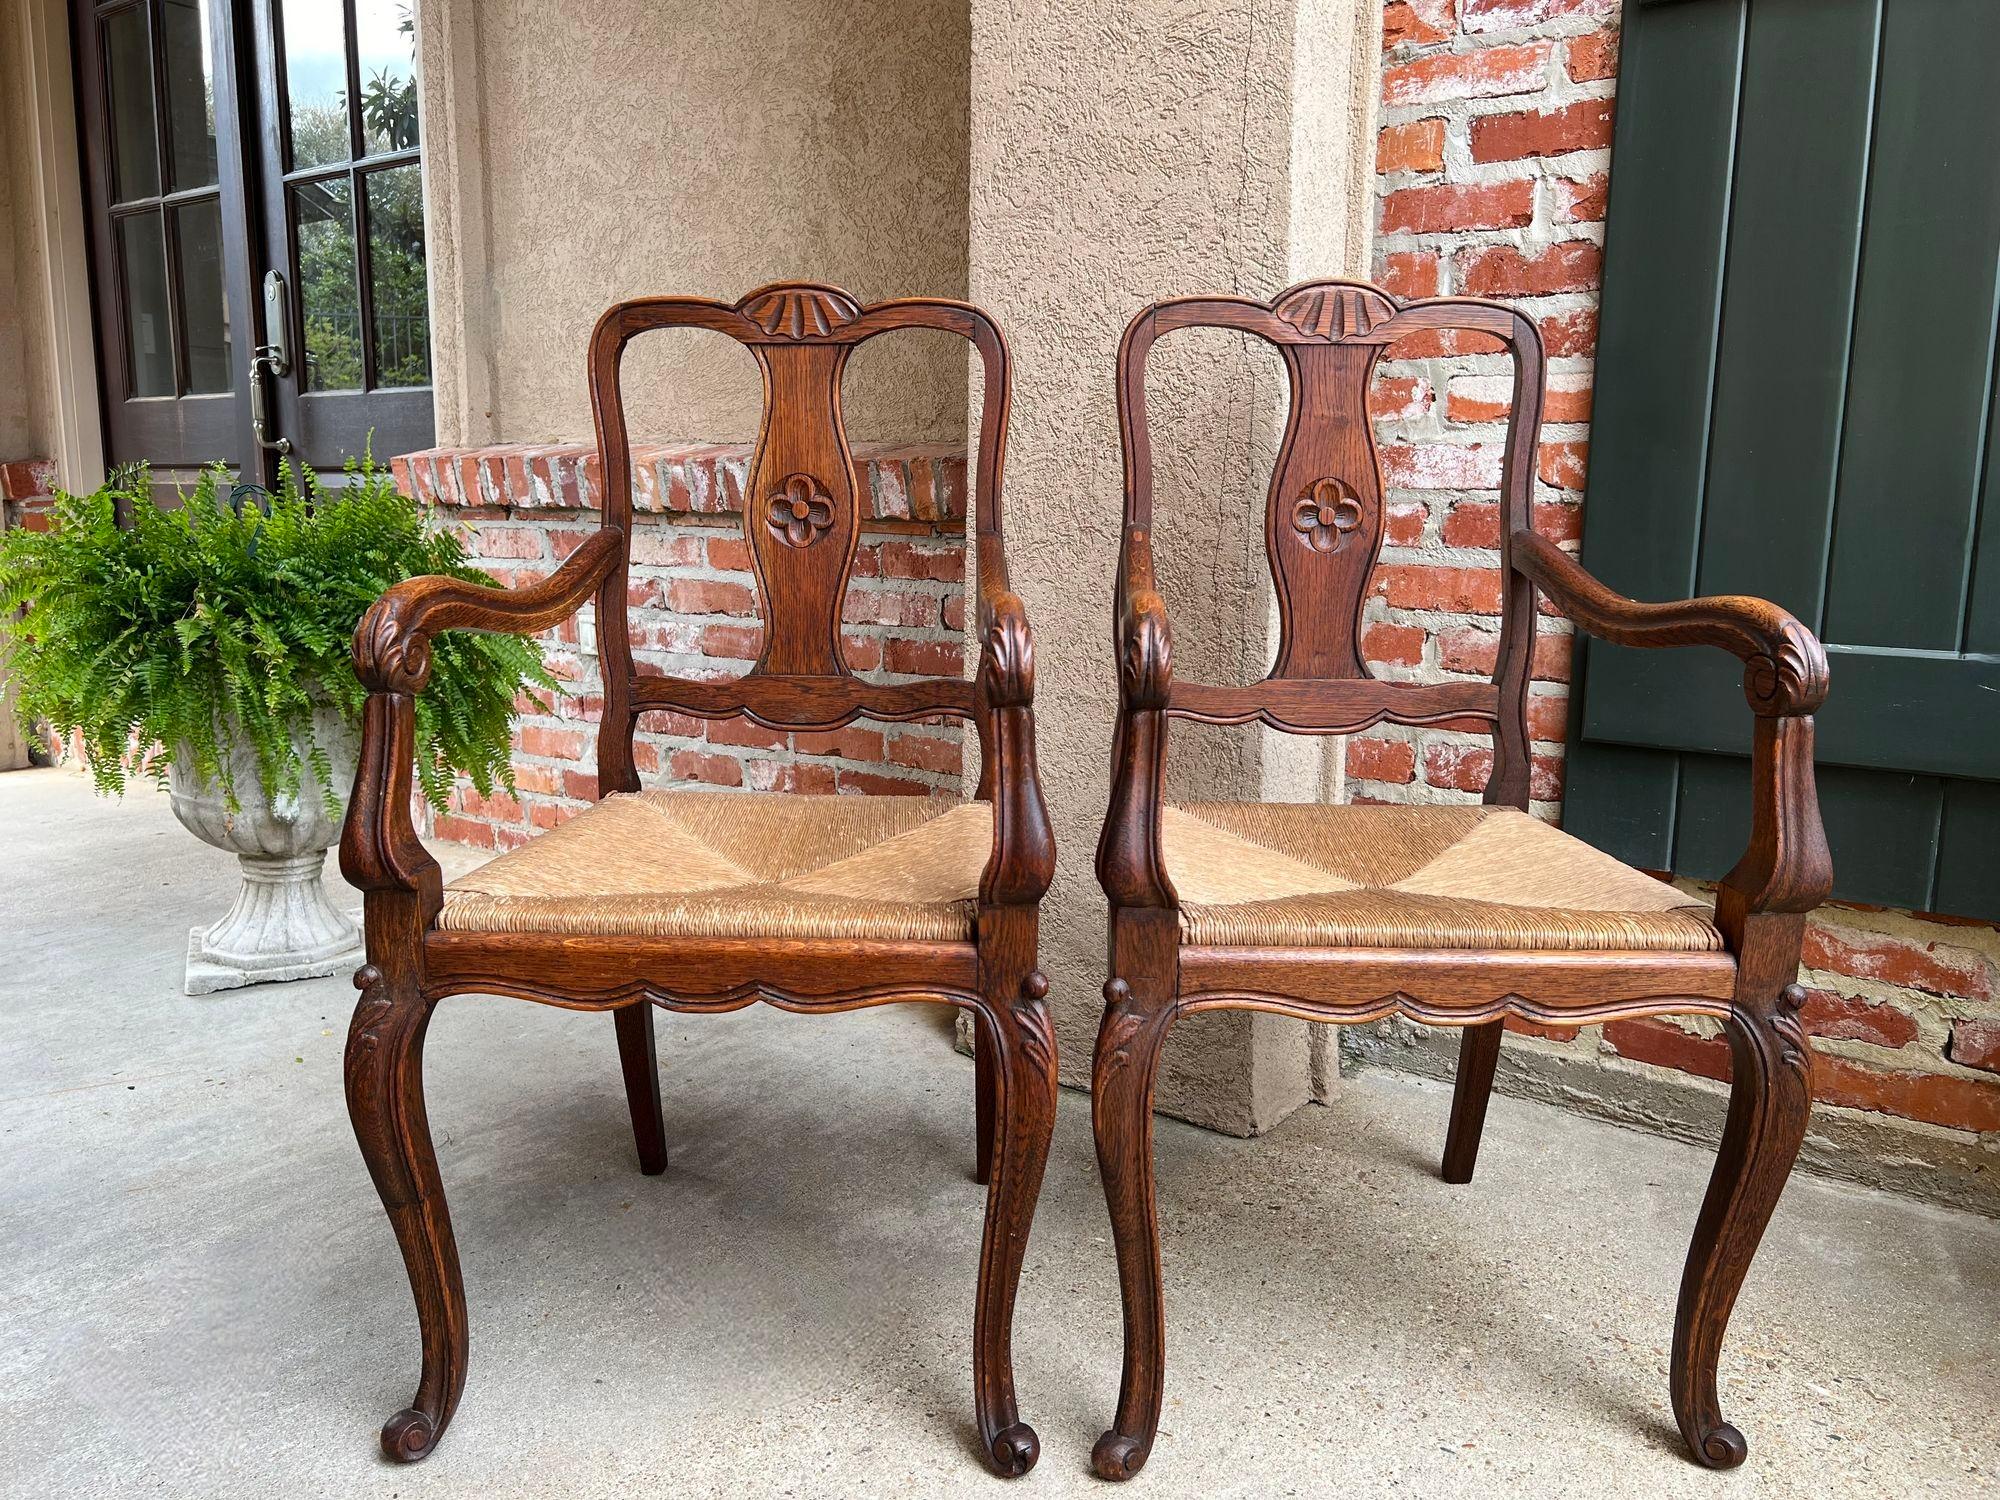 Direct from France, a lovely pair of antique French arm chairs, with classic French style, perfect for any sitting area, from den to family room, kitchen or dining room, timeless style that compliments any décor!
Serpentine backs with a lovely